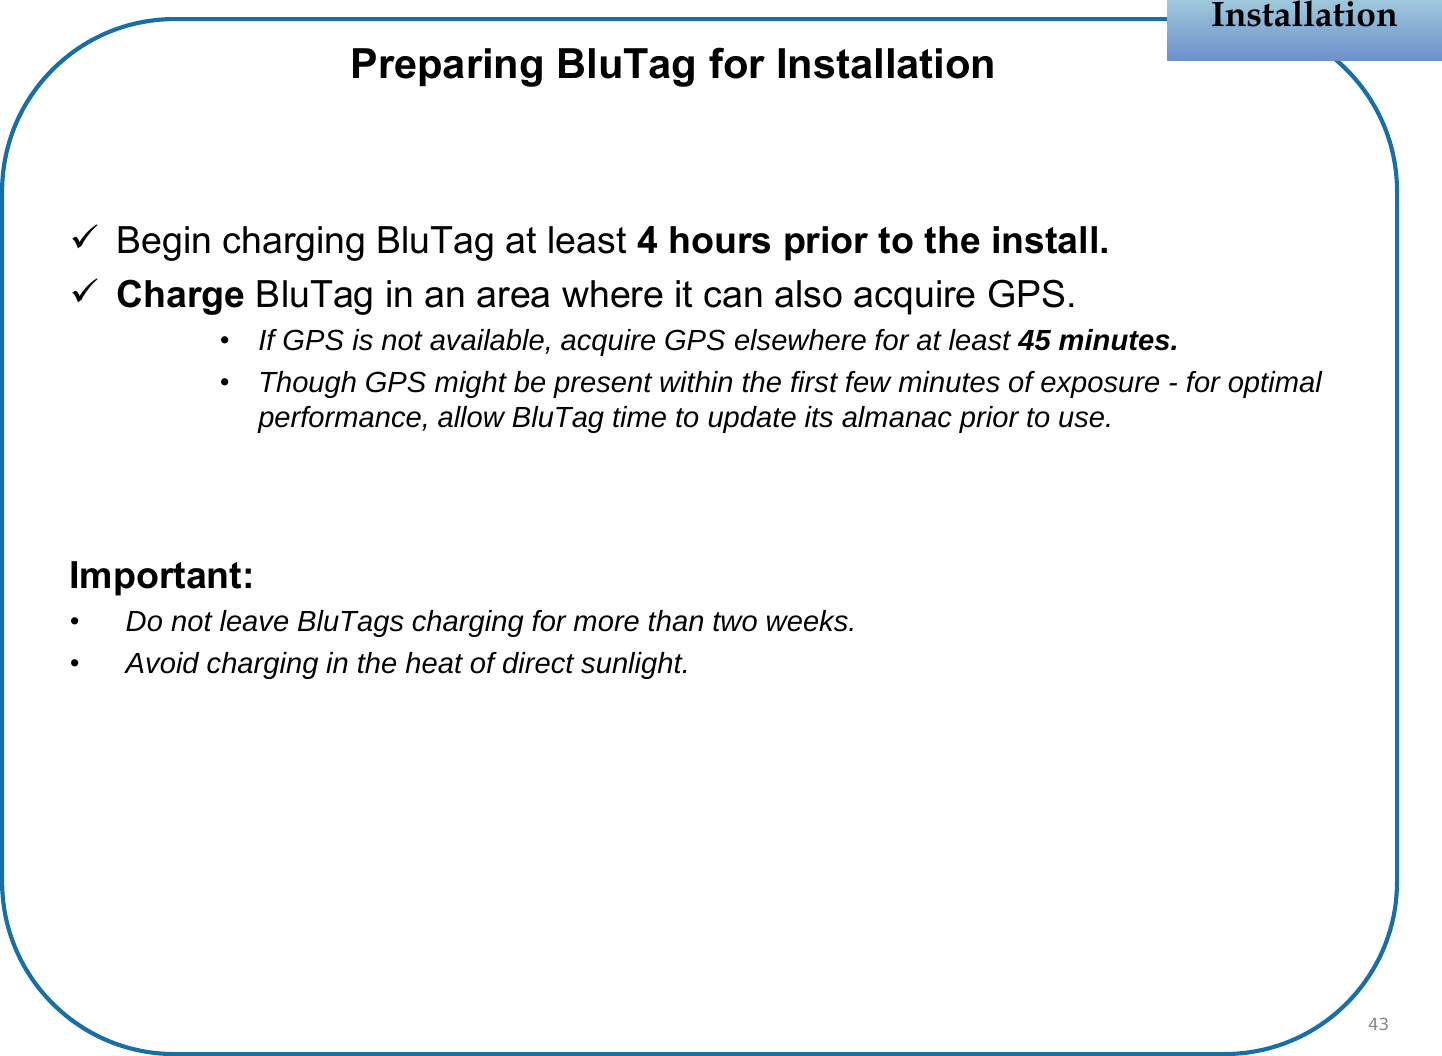 Begin charging BluTag at least 4 hours prior to the install.Charge BluTag in an area where it can also acquire GPS.•If GPS is not available, acquire GPS elsewhere for at least 45 minutes.•Though GPS might be present within the first few minutes of exposure - for optimal performance, allow BluTag time to update its almanac prior to use.Important:•Do not leave BluTags charging for more than two weeks.•Avoid charging in the heat of direct sunlight.InstallationInstallationPreparing BluTag for Installation43